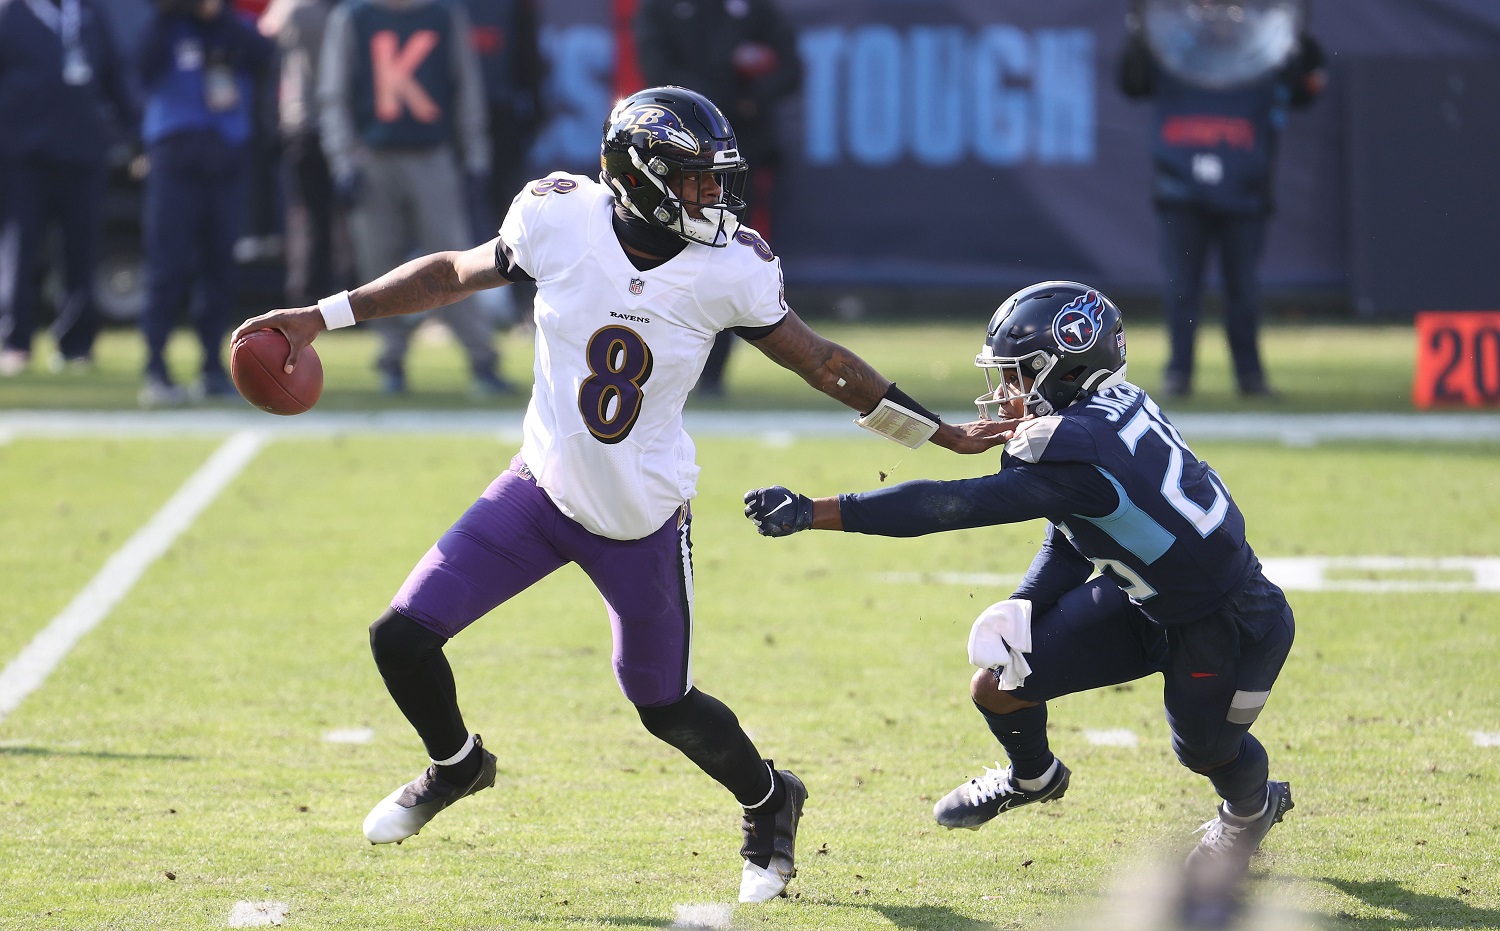 Lamar Jackson scrambles against the Tennessee Titans in the wild-card round of the NFL playoffs on Jan. 10, 2021. | Andy Lyons/Getty Images